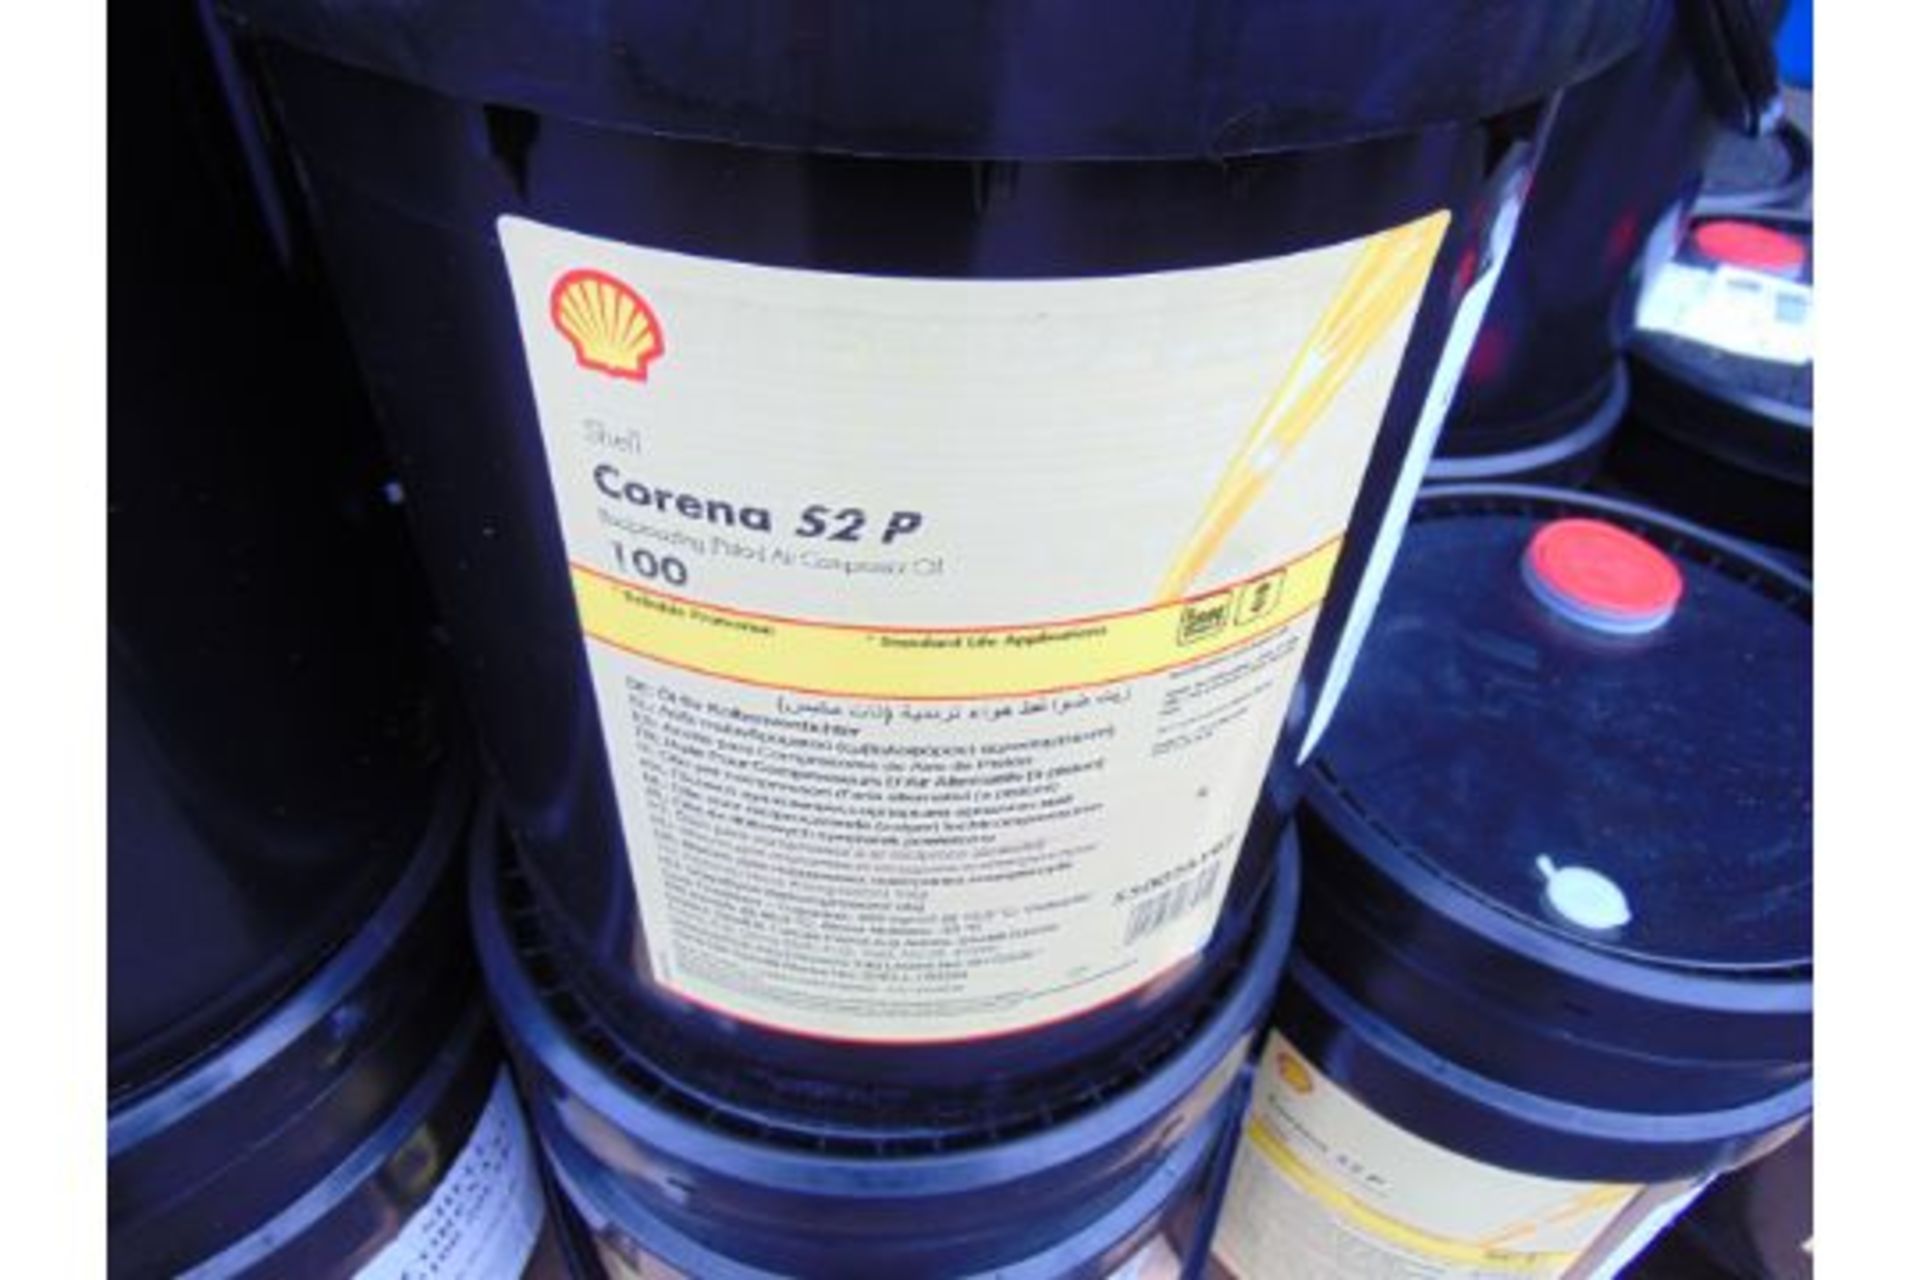 19 x 20 Litre Drums of Shell Corena S2 P100 High Quality Lubricating Oil - Bild 2 aus 5